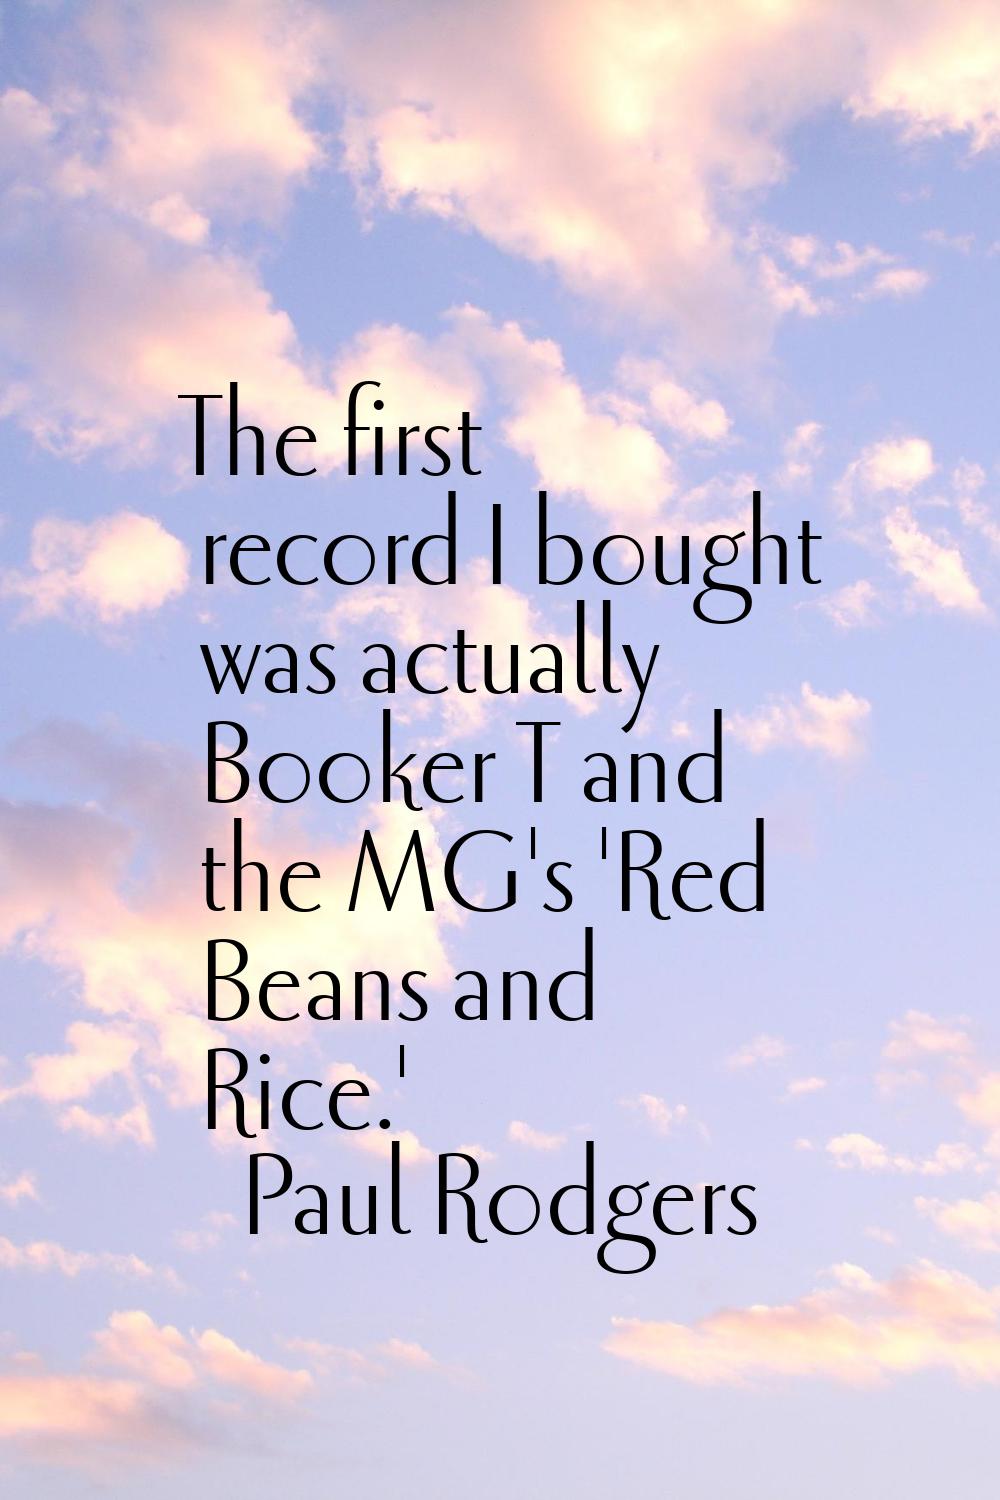 The first record I bought was actually Booker T and the MG's 'Red Beans and Rice.'